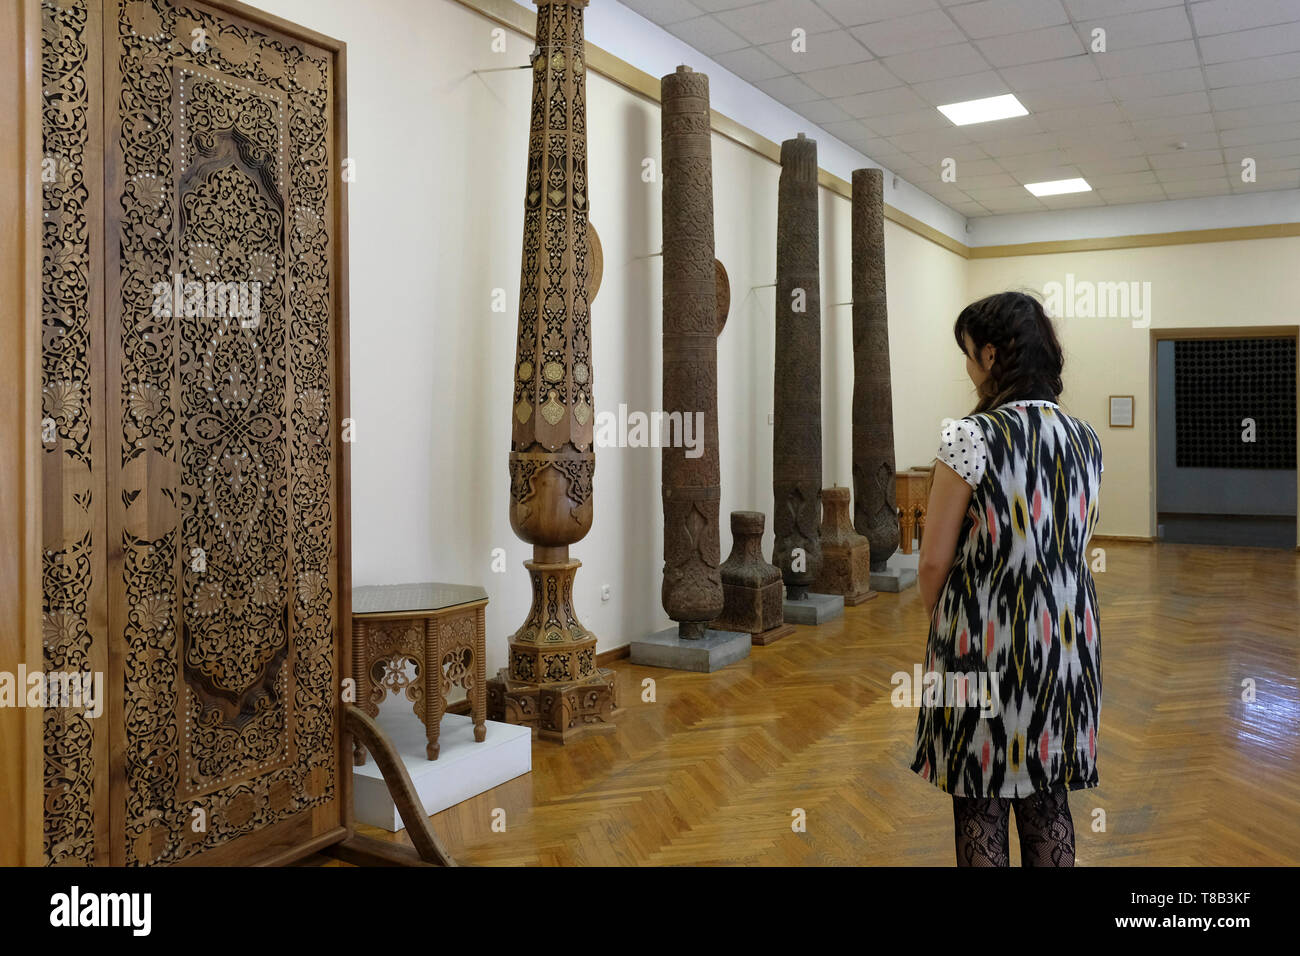 A visitor looking at ornately carved wood displayed at the Museum of Applied Arts situated in the former home of Imperial Russian diplomat Alexander Polovtsev in the city of Tashkent capital of Uzbekistan Stock Photo